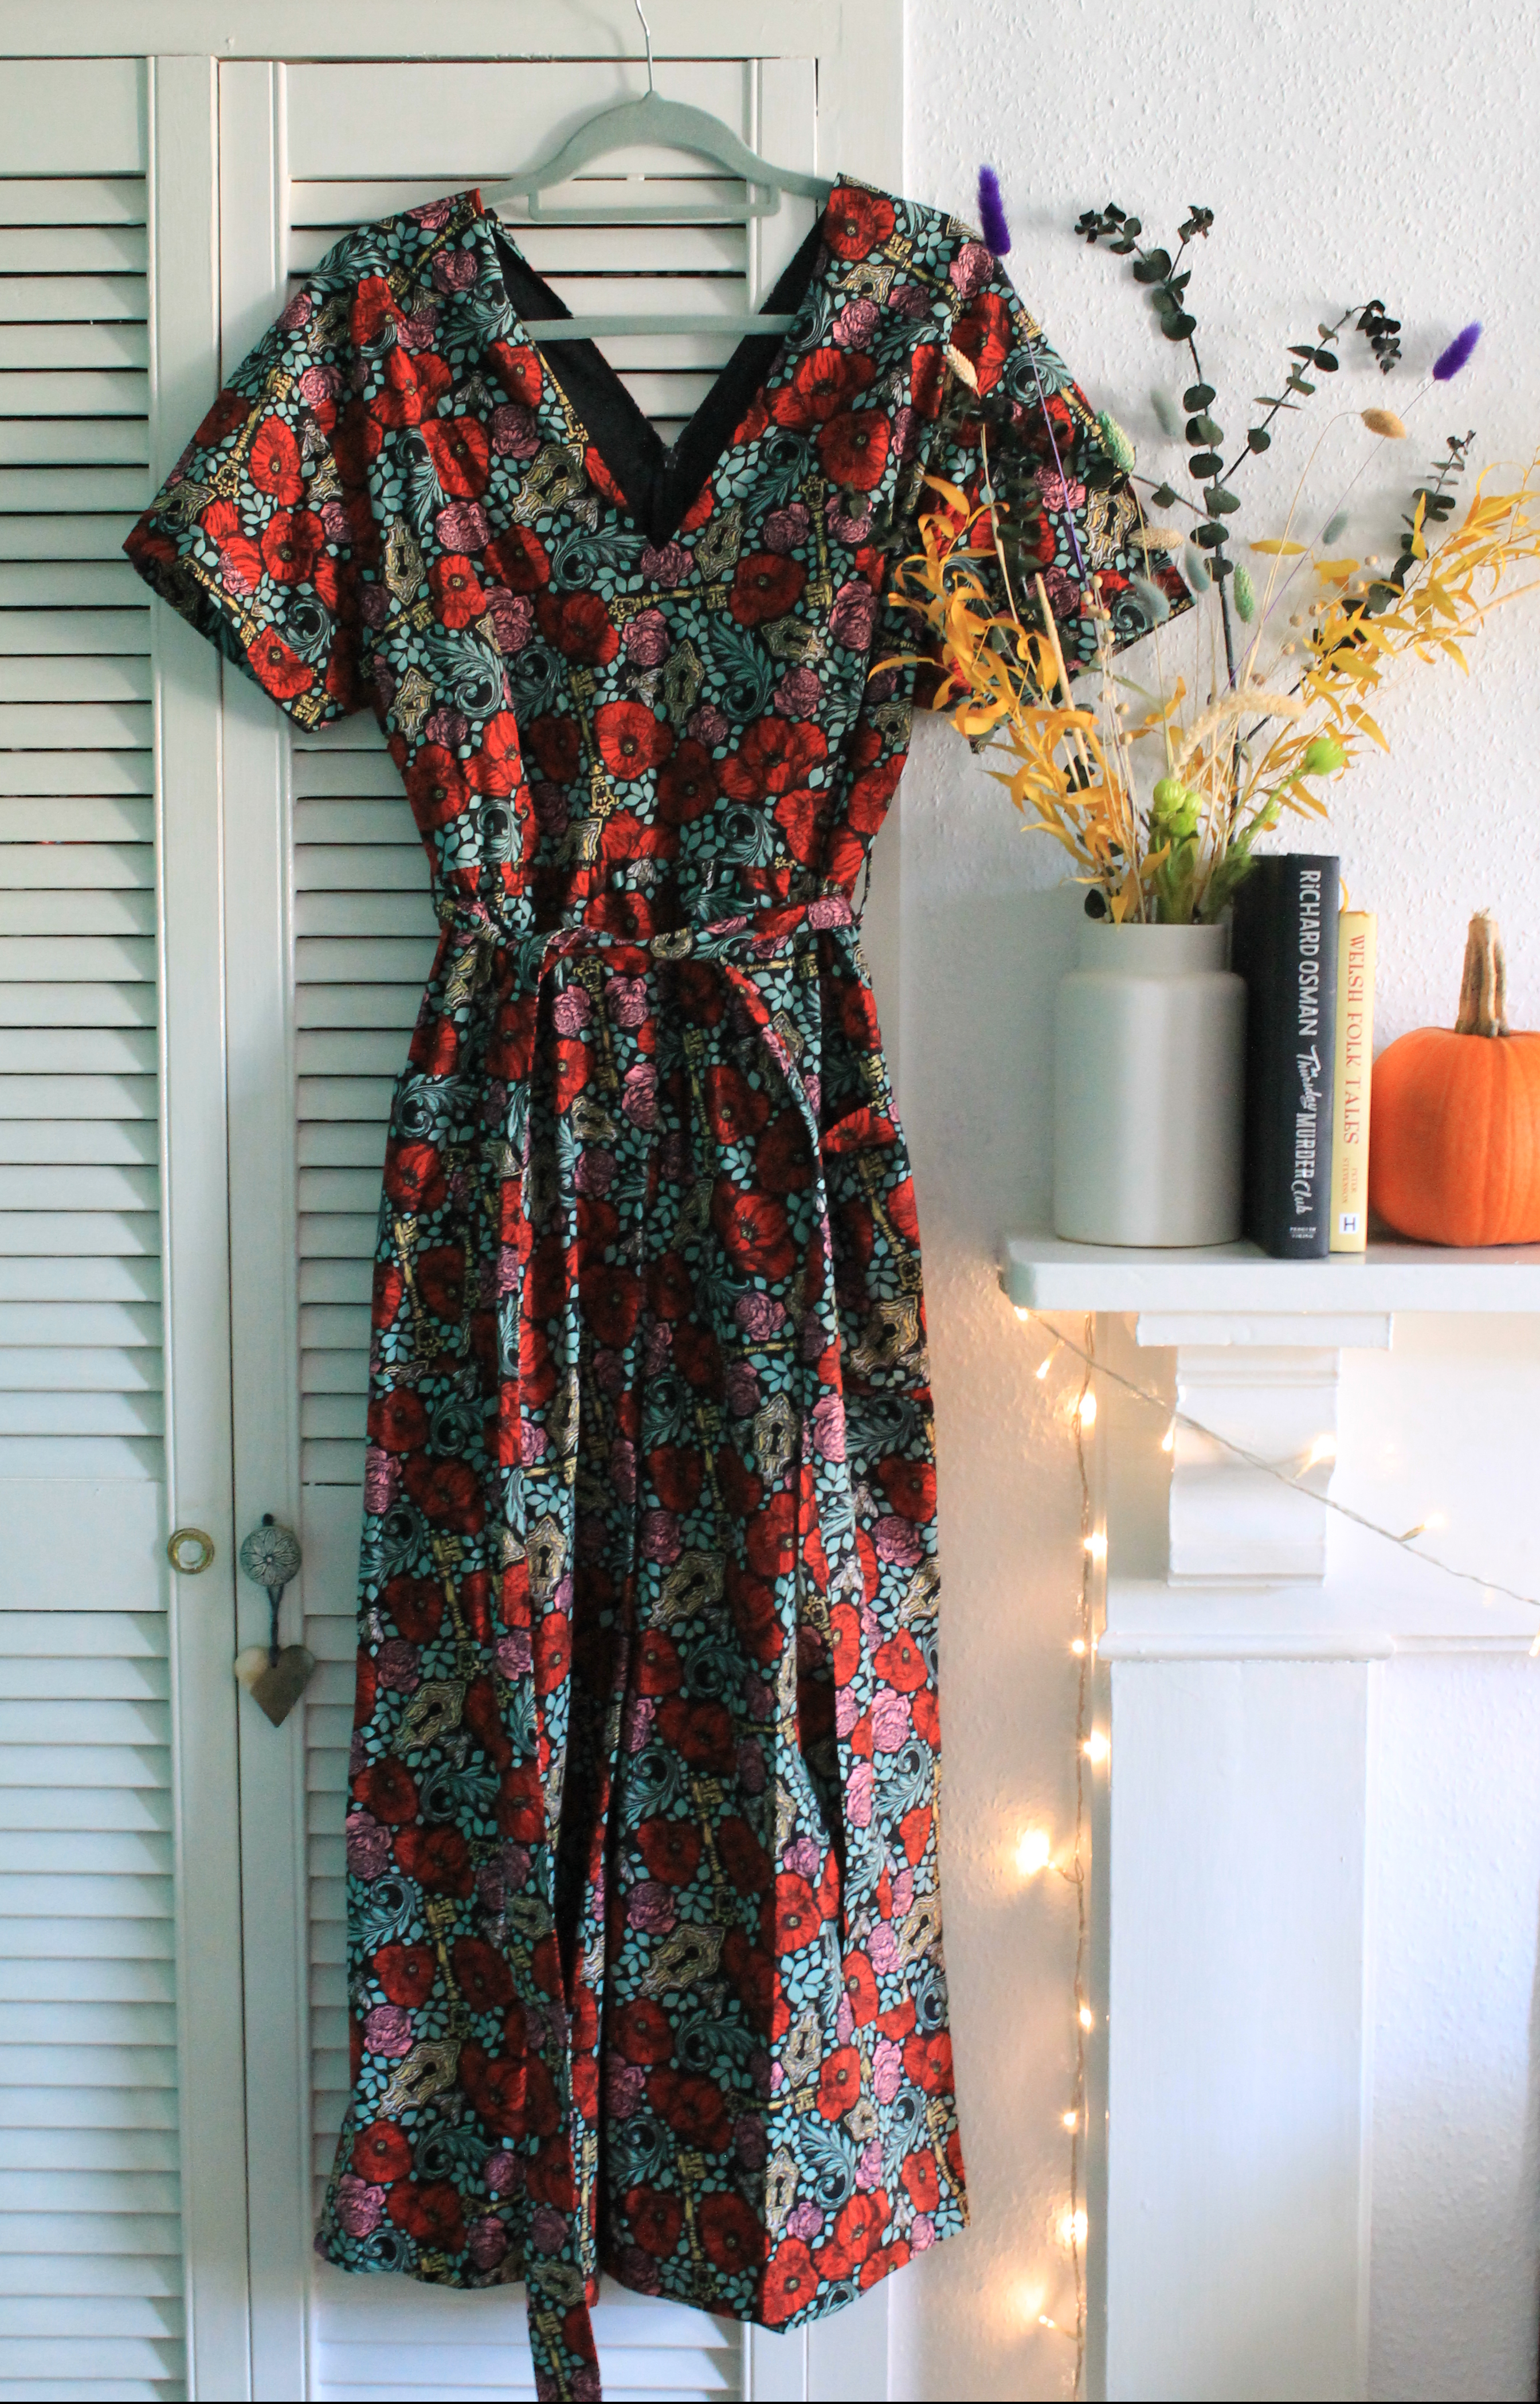 A jumpsuit hanging on a white cupboard. The jumpsuit is printed with red, green, and pink flowers. It is next to a white vase full of dried flowers.